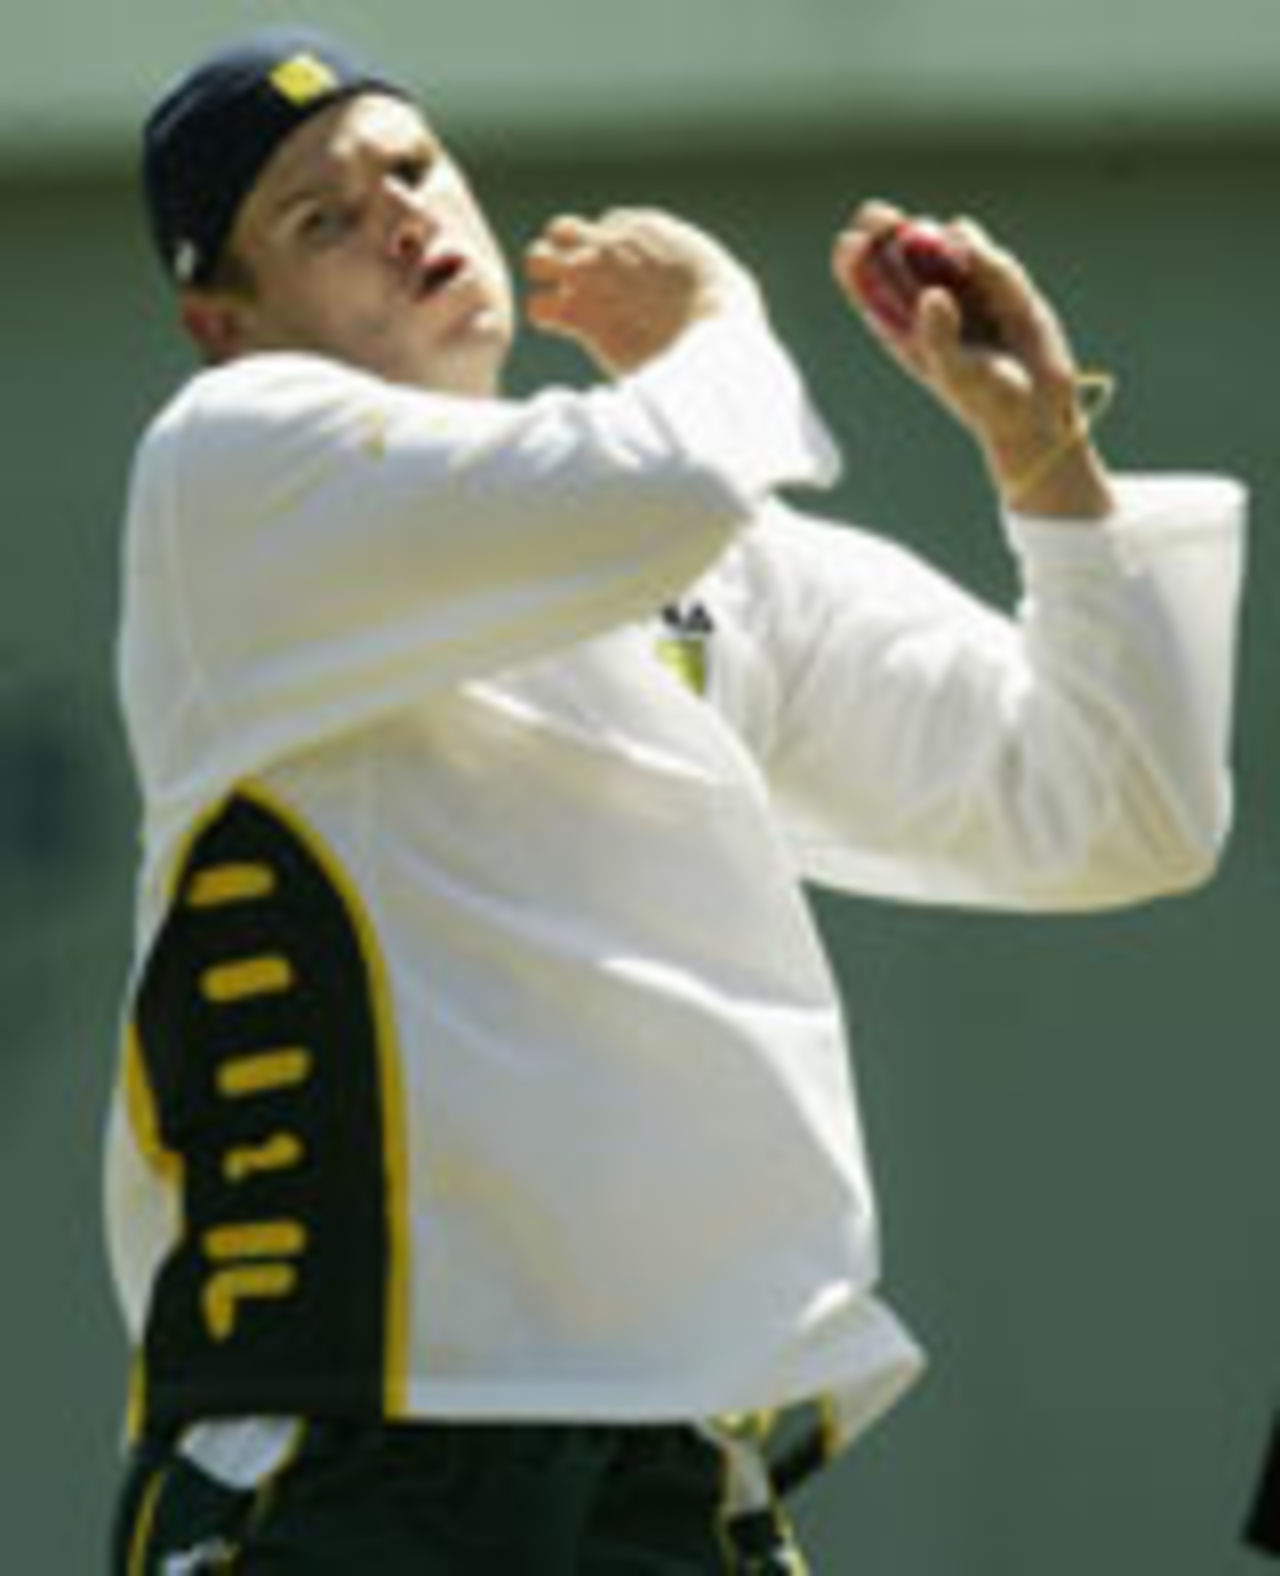 Nathan Bracken practising in the nets ahead of 2nd Test v Zimbabwe, October 15, 2003